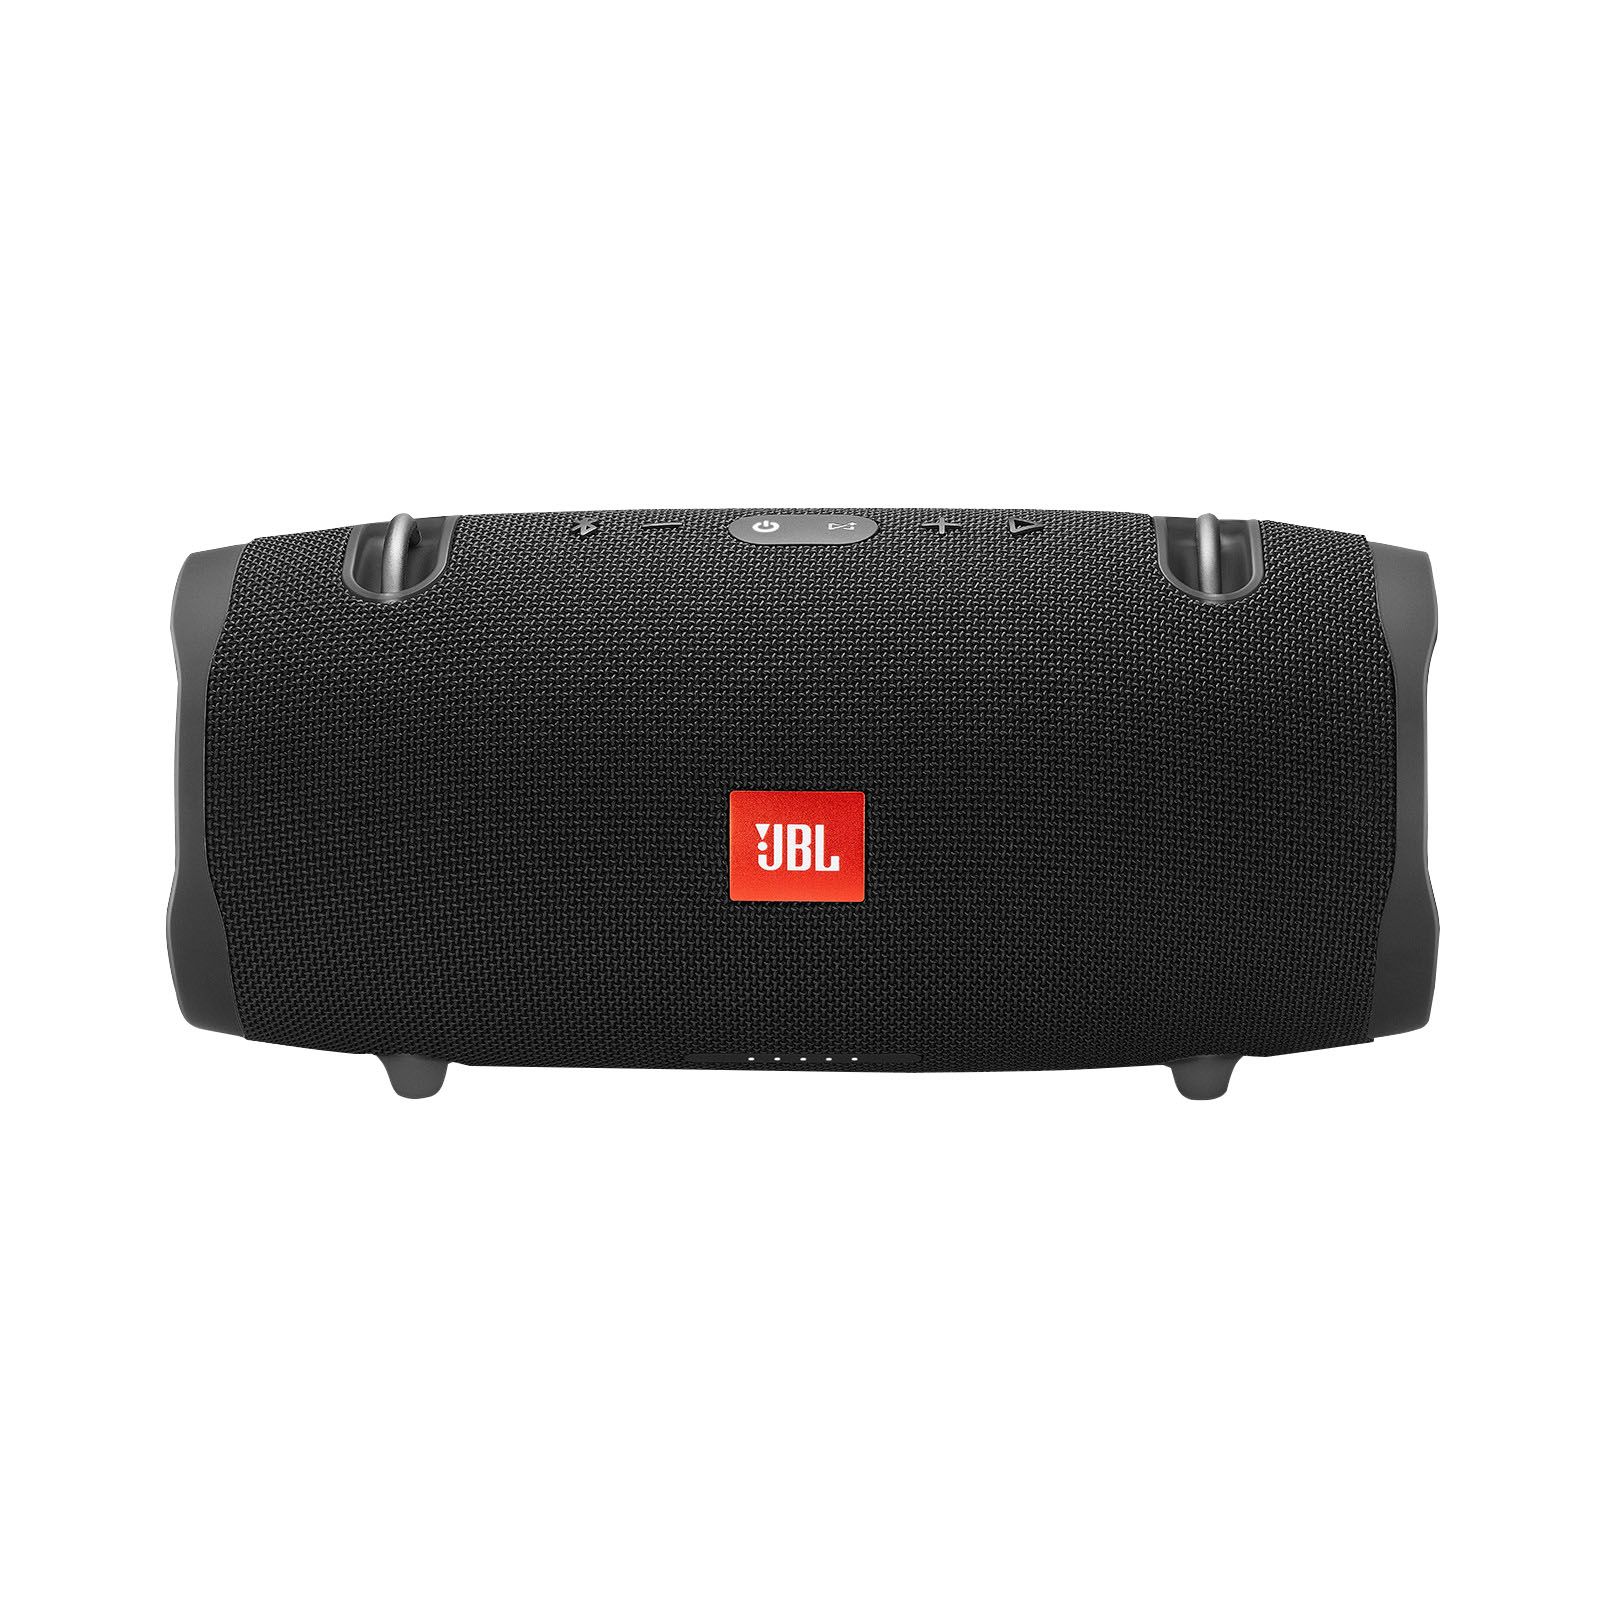 JBL's BoomBox 2 Is On Sale for the Lowest Price It Has Ever Been